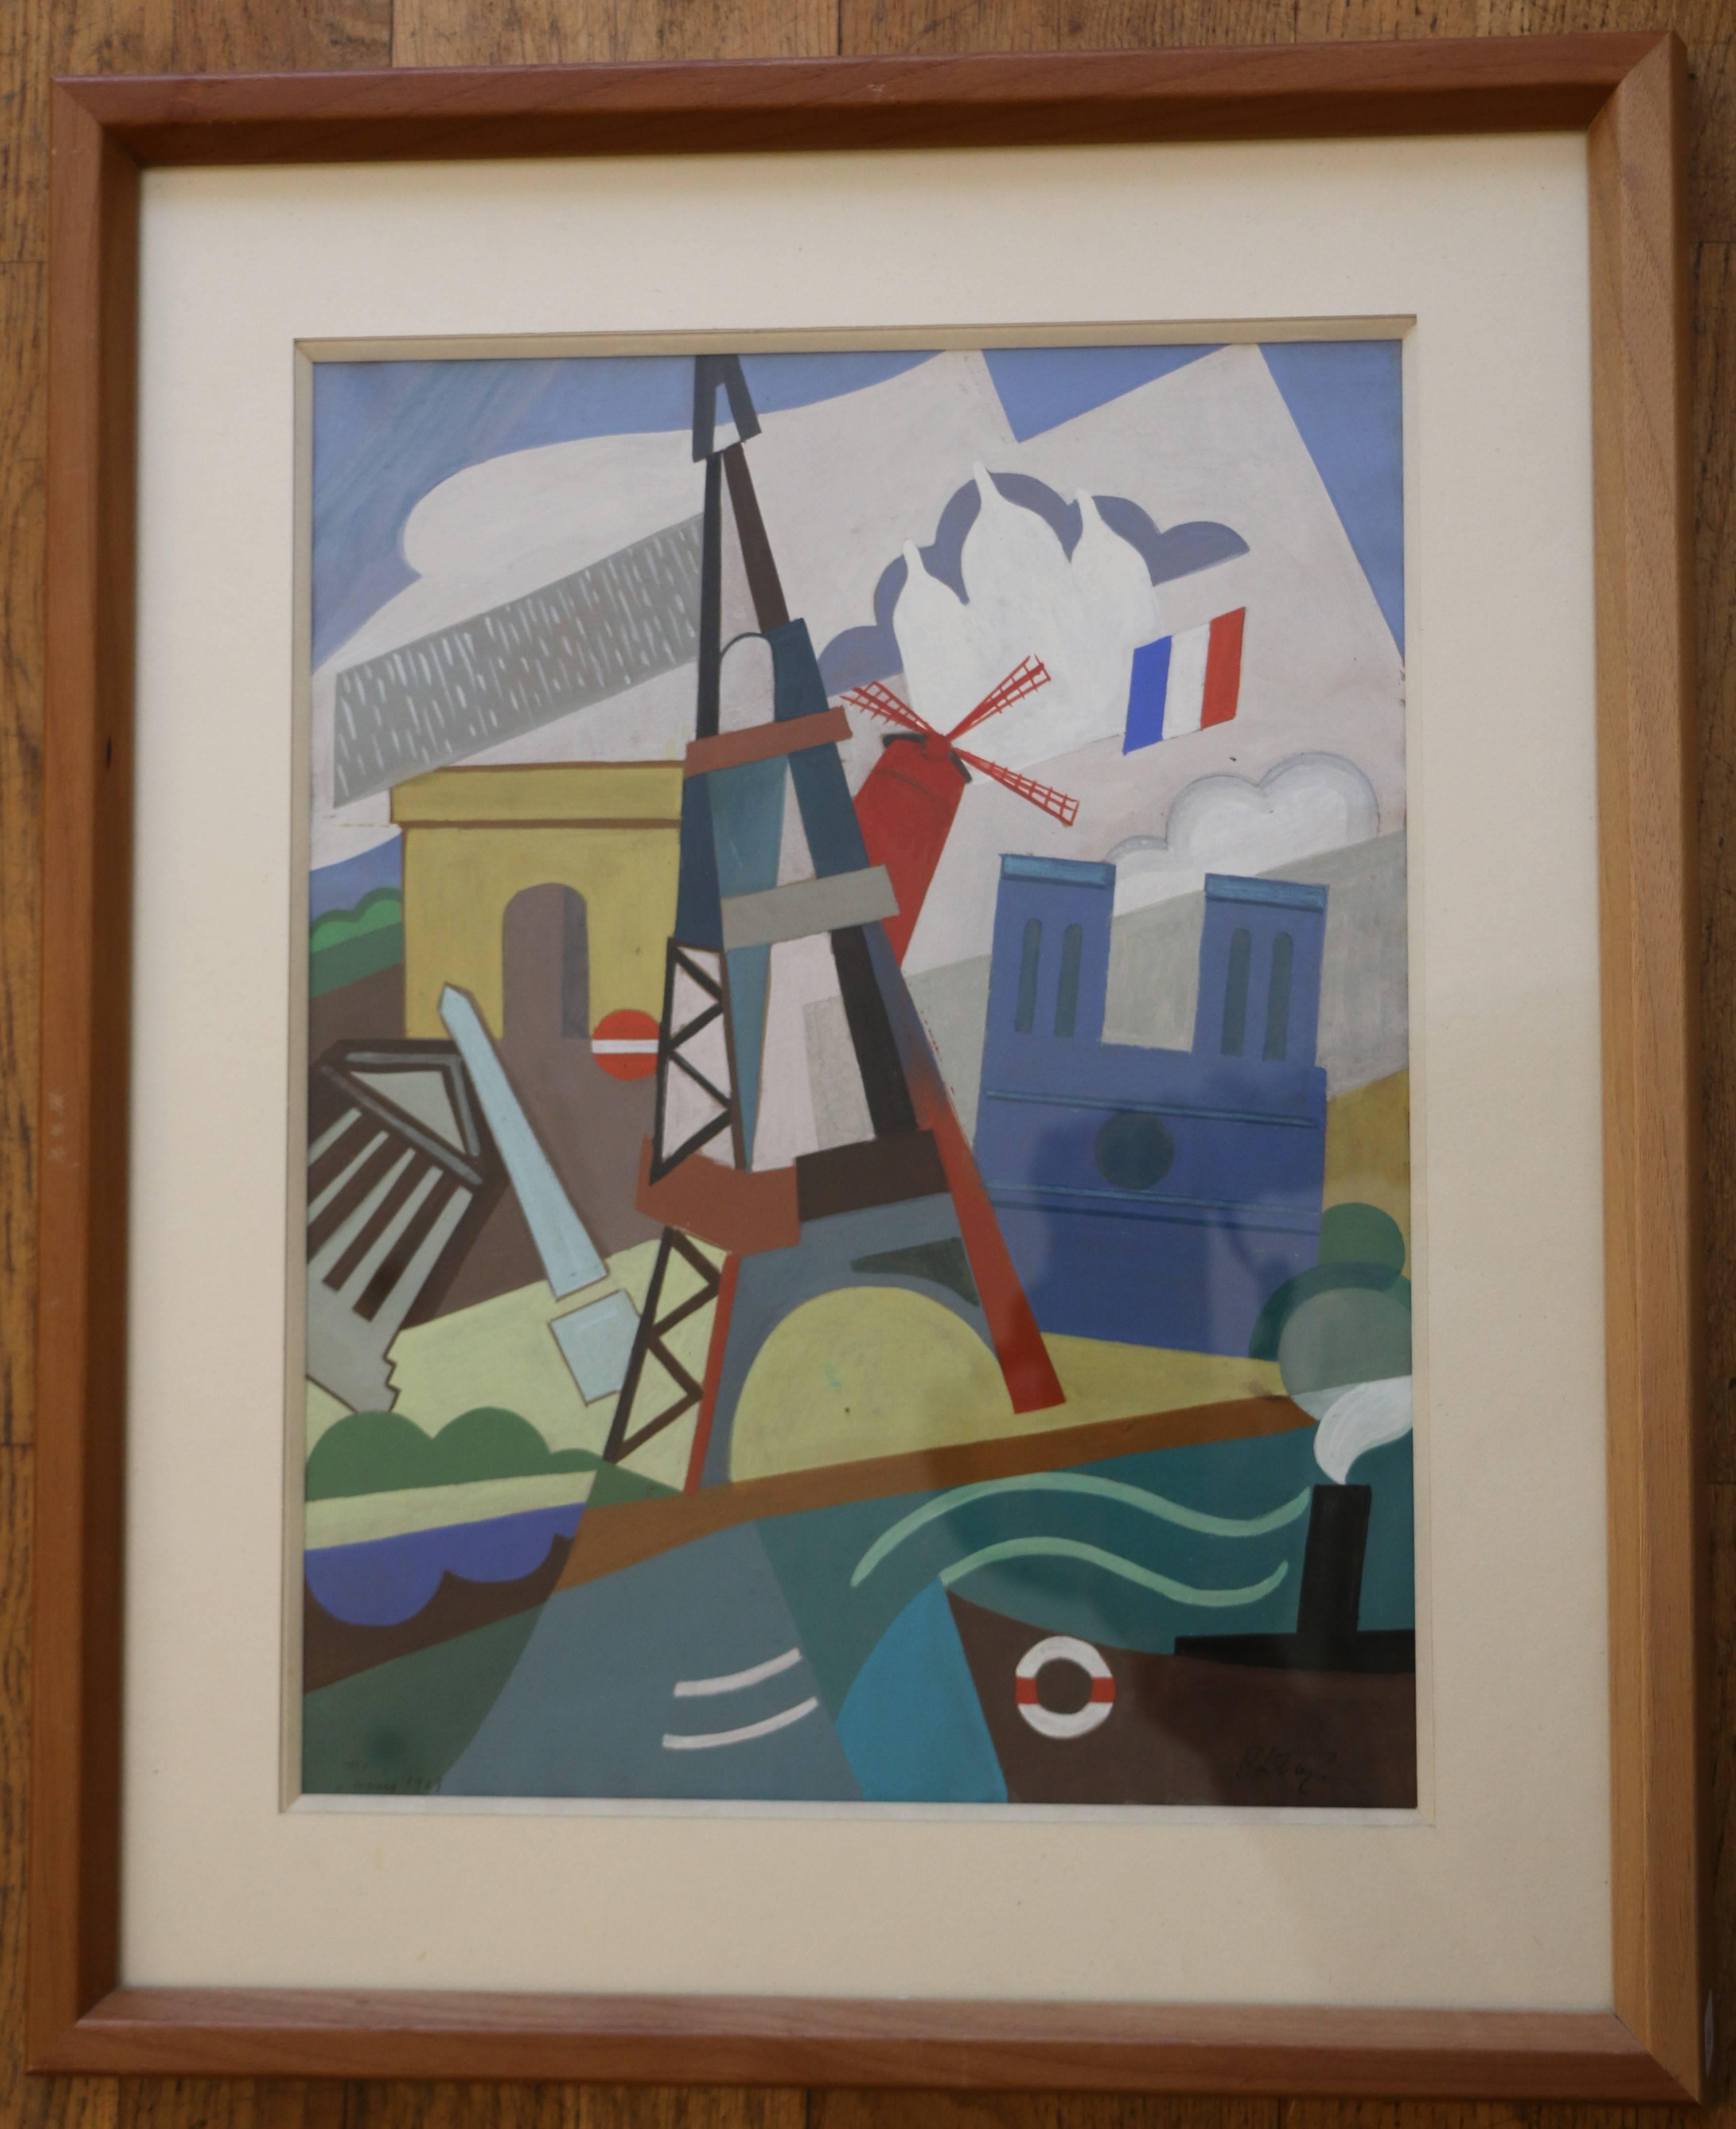 Cubist watercolor on paper attributed to Pal Patzay (1896-1979. Hungarian school, dated 1923 and situated in Paris bottom left, signed bottom right.
It represents the Eiffel tower and several famous Paris monuments (Notre Dame cathedral, Arc de